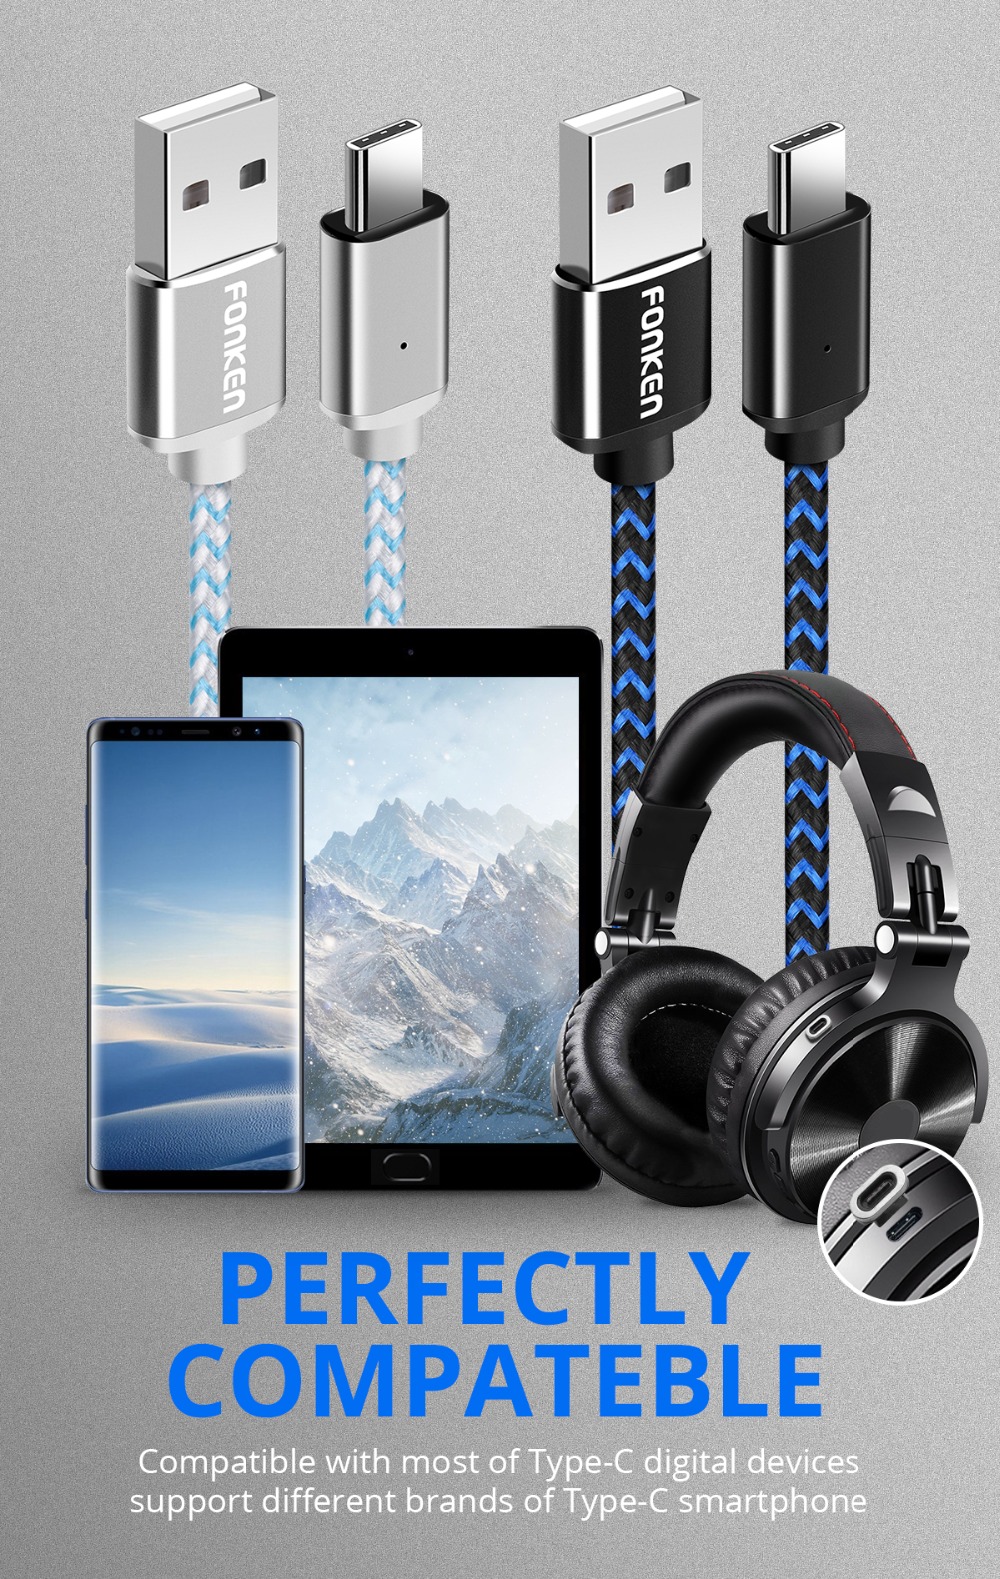 FENKON 2.4A Micro USB Type C Magnetic Nylon Braided Fast Charging Data Cable For Oneplus 7 Pocophone HUAWEI P30 Mate20 MI9 S10 S10+